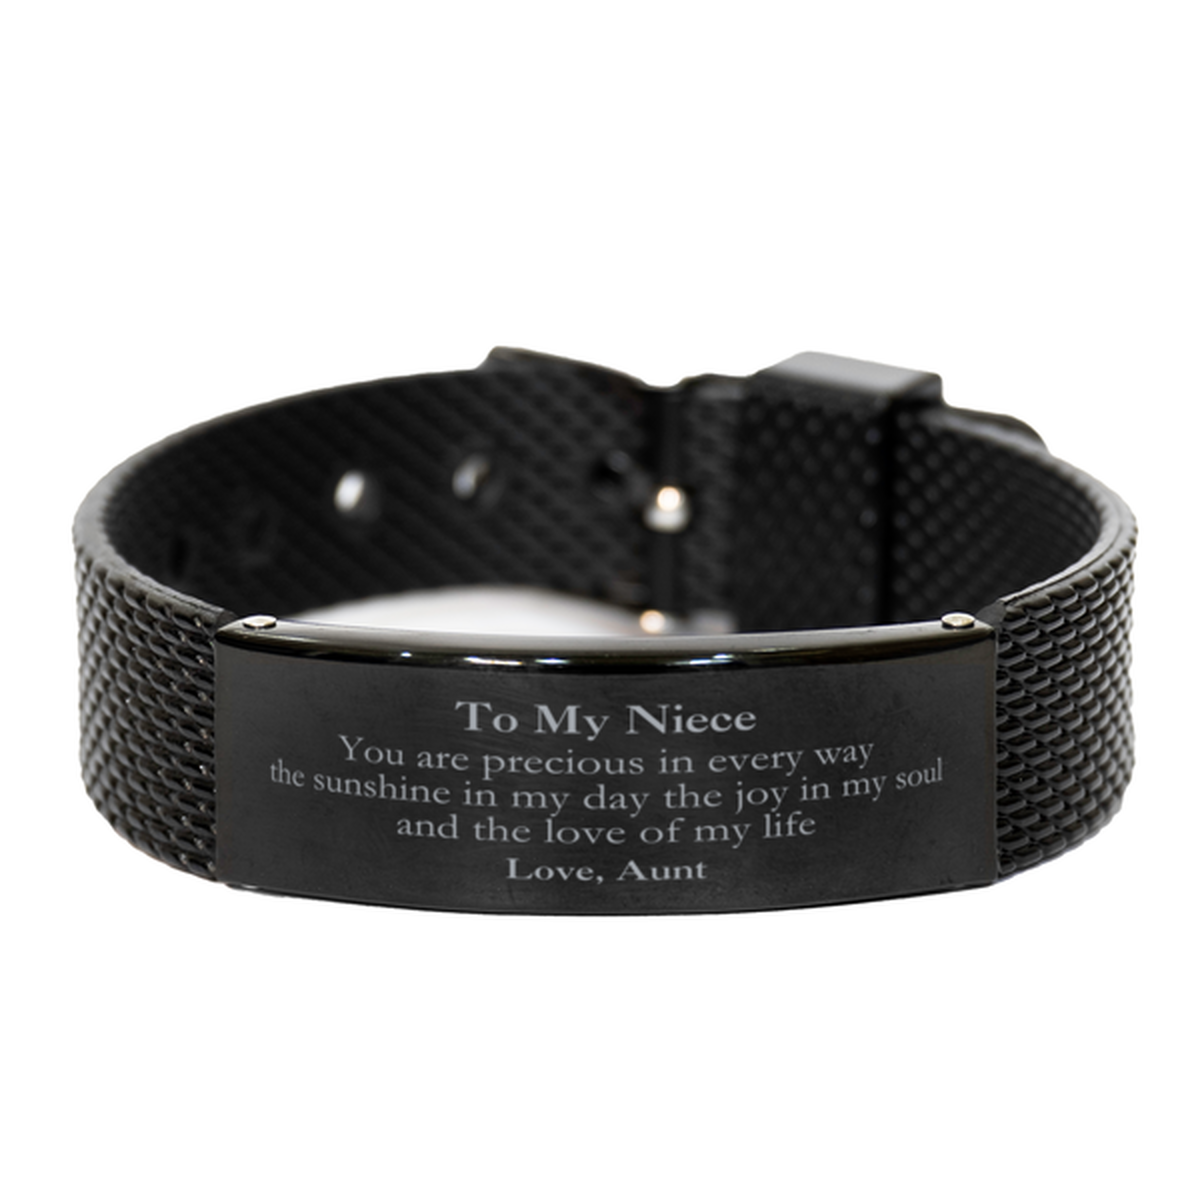 Graduation Gifts for Niece Black Shark Mesh Bracelet Present from Aunt, Christmas Niece Birthday Gifts Niece You are precious in every way the sunshine in my day. Love, Aunt